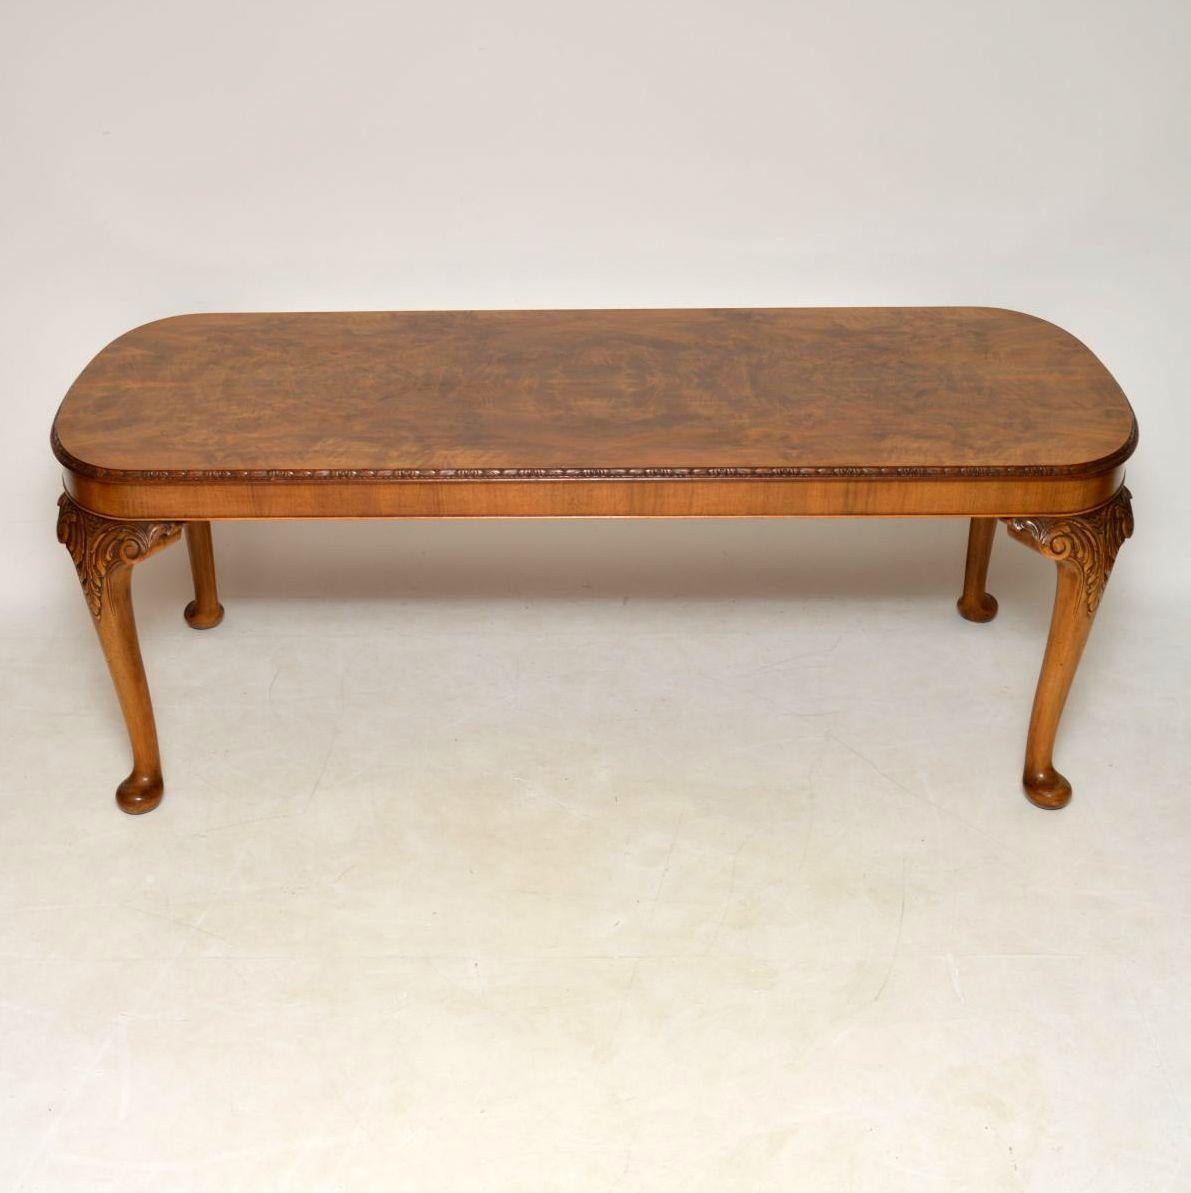 Large antique Queen Anne style walnut dining table in good condition, having just been French polished. This table has a fixed top in figured walnut with a lovely pattern and has carved top edge. The solid walnut legs are well carved at the tops.